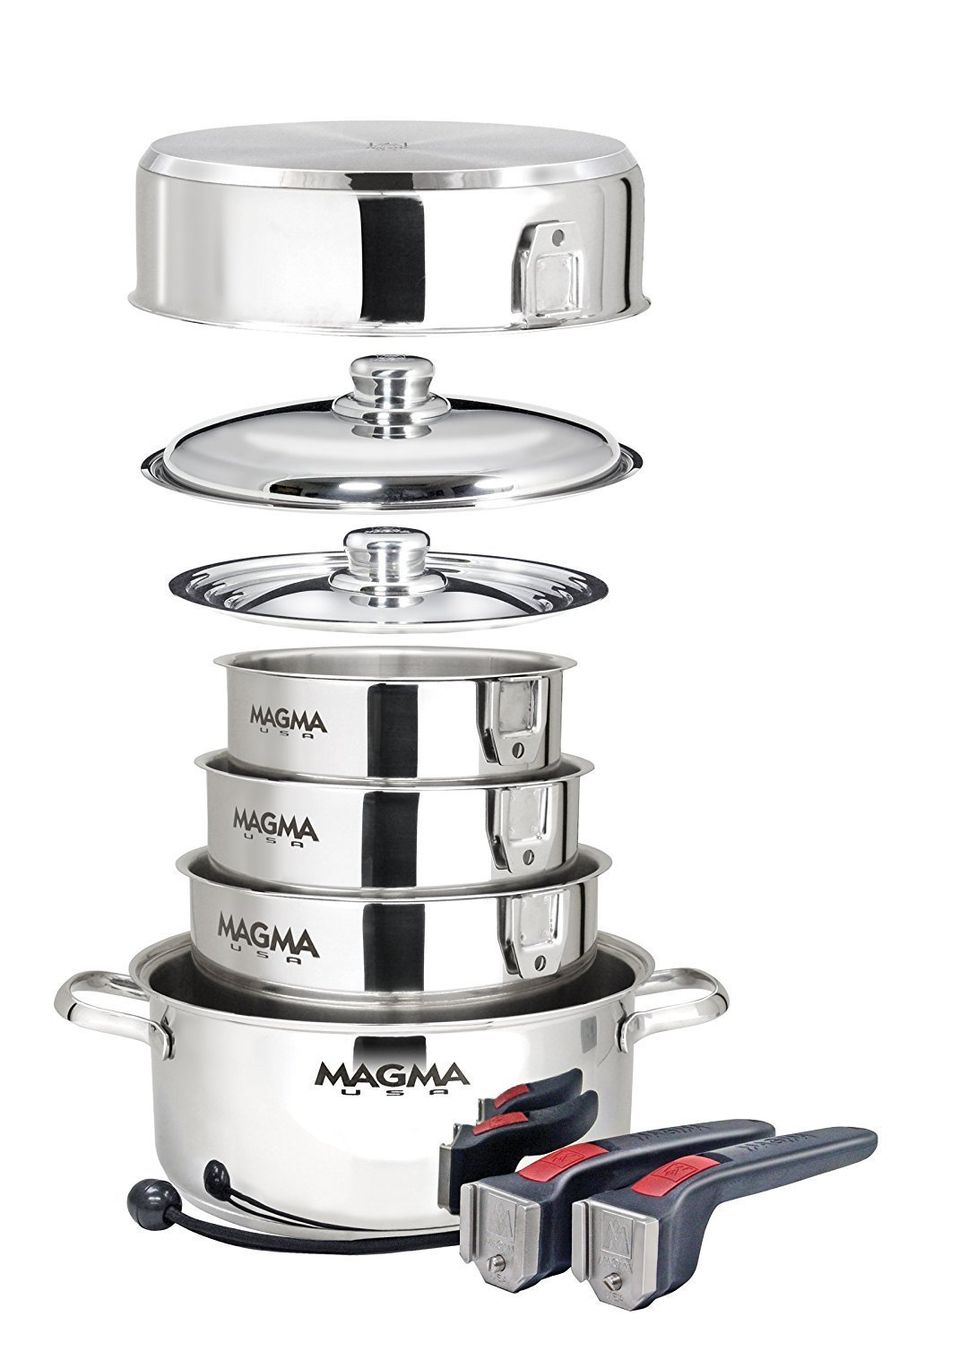 Magma Nesting 7-Piece Stainless Steel Cookware Set with Ceramica Non-Stick  - Living In Beauty